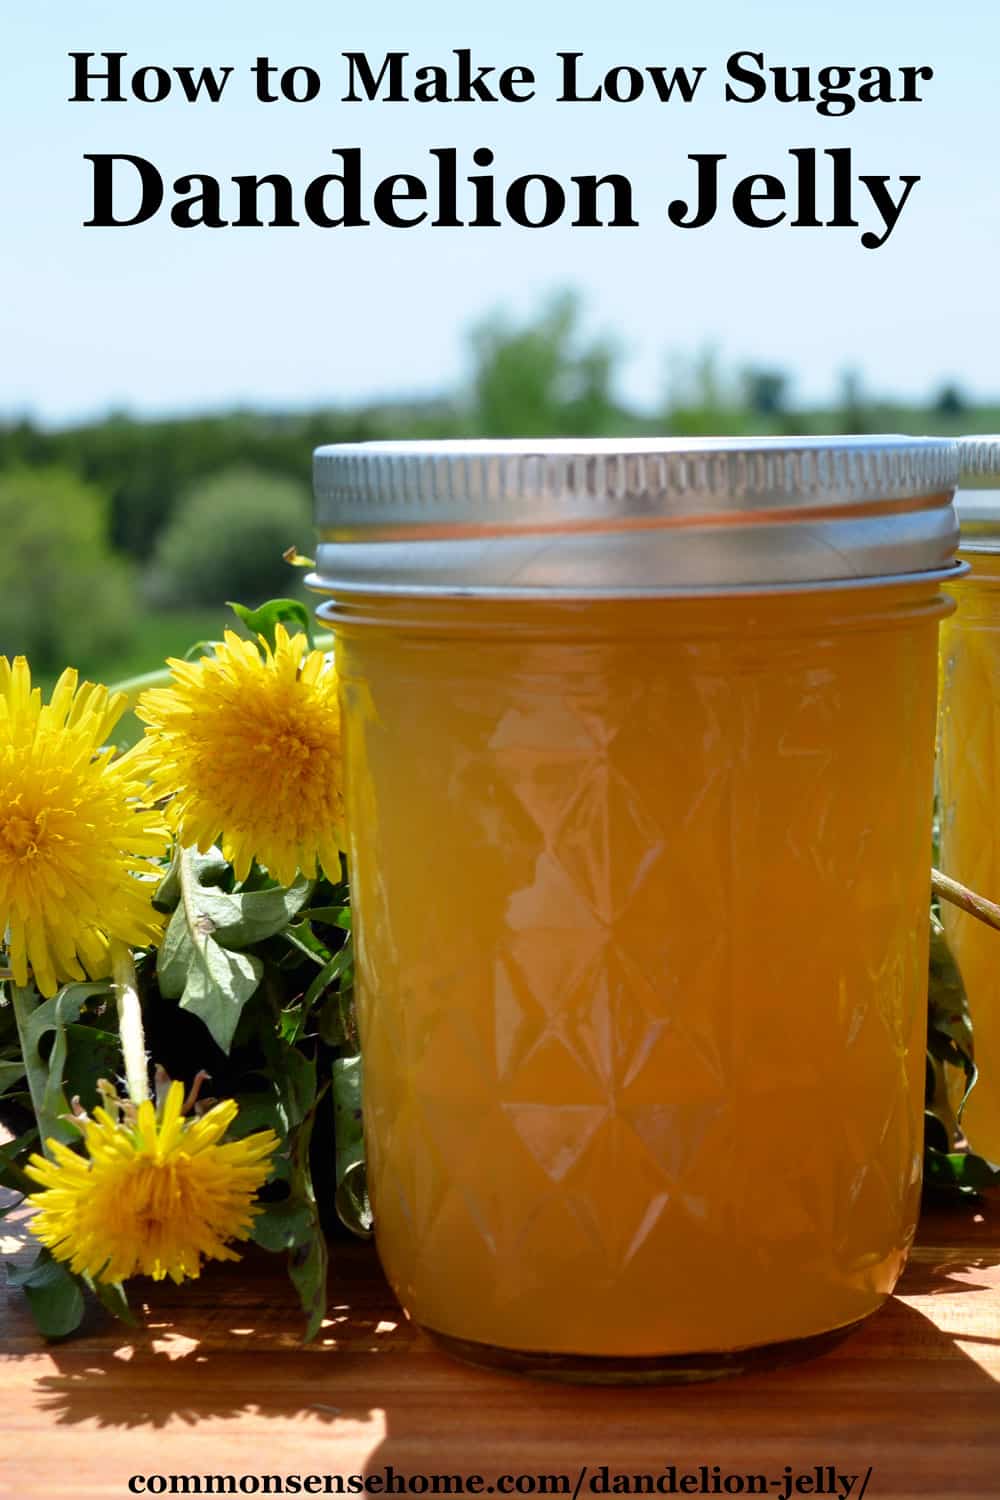 Dandelion Jelly - Easy Flower Jelly Recipe with Less Sugar